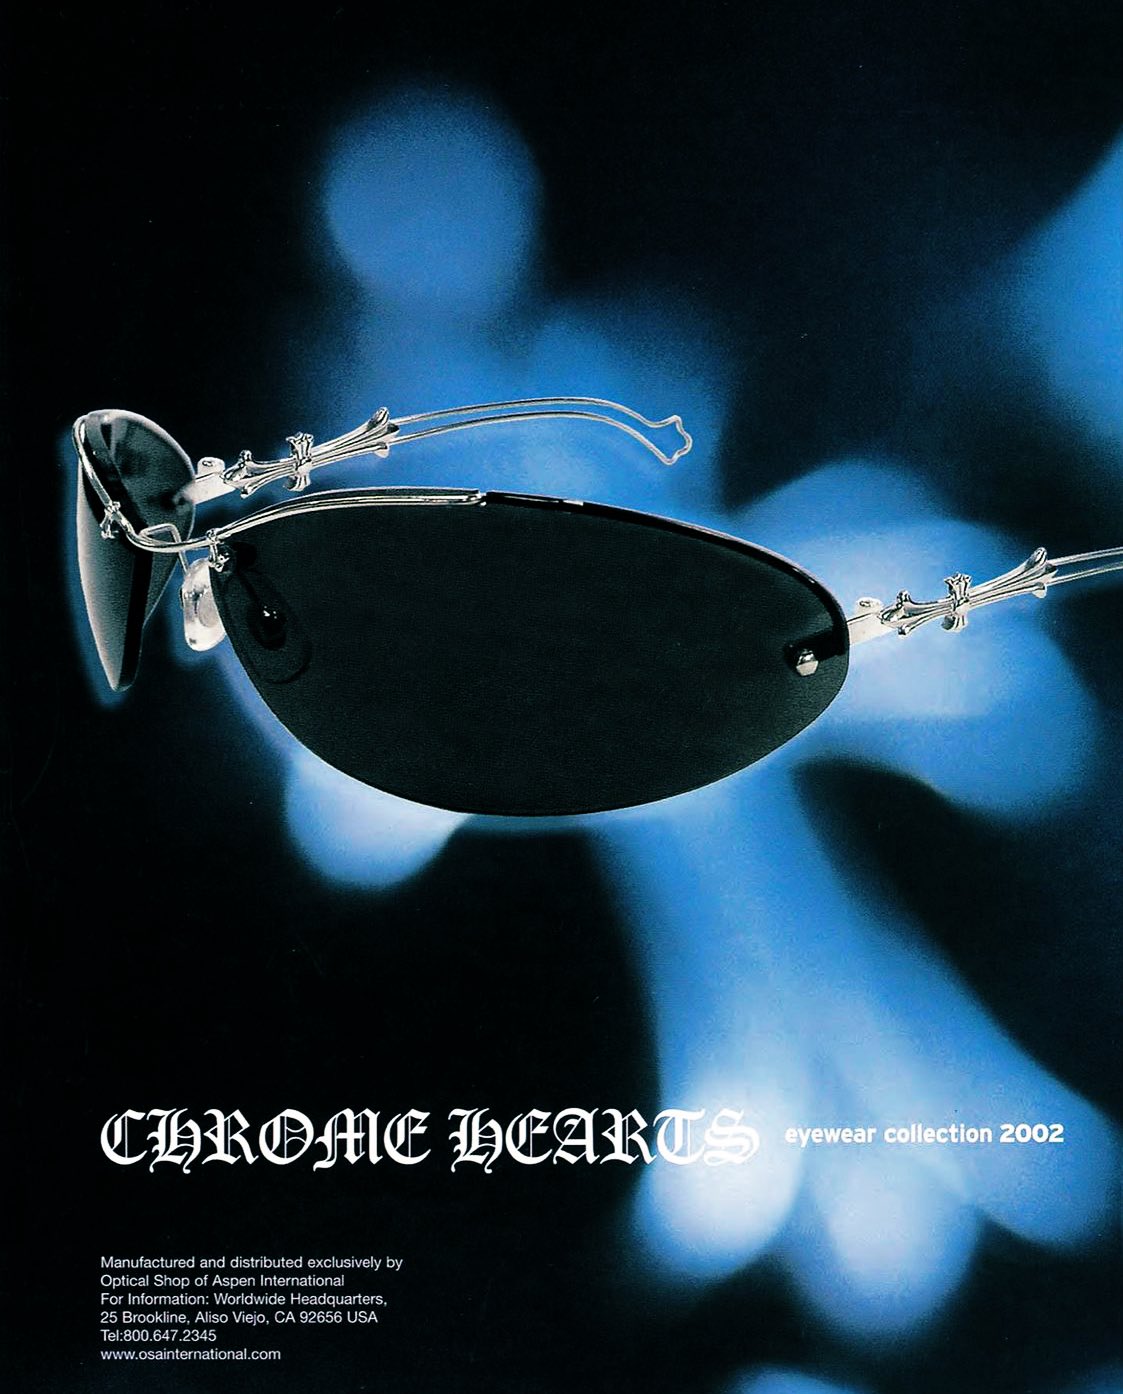 image therapy — Chrome Hearts Magazine, Store Display (2001)